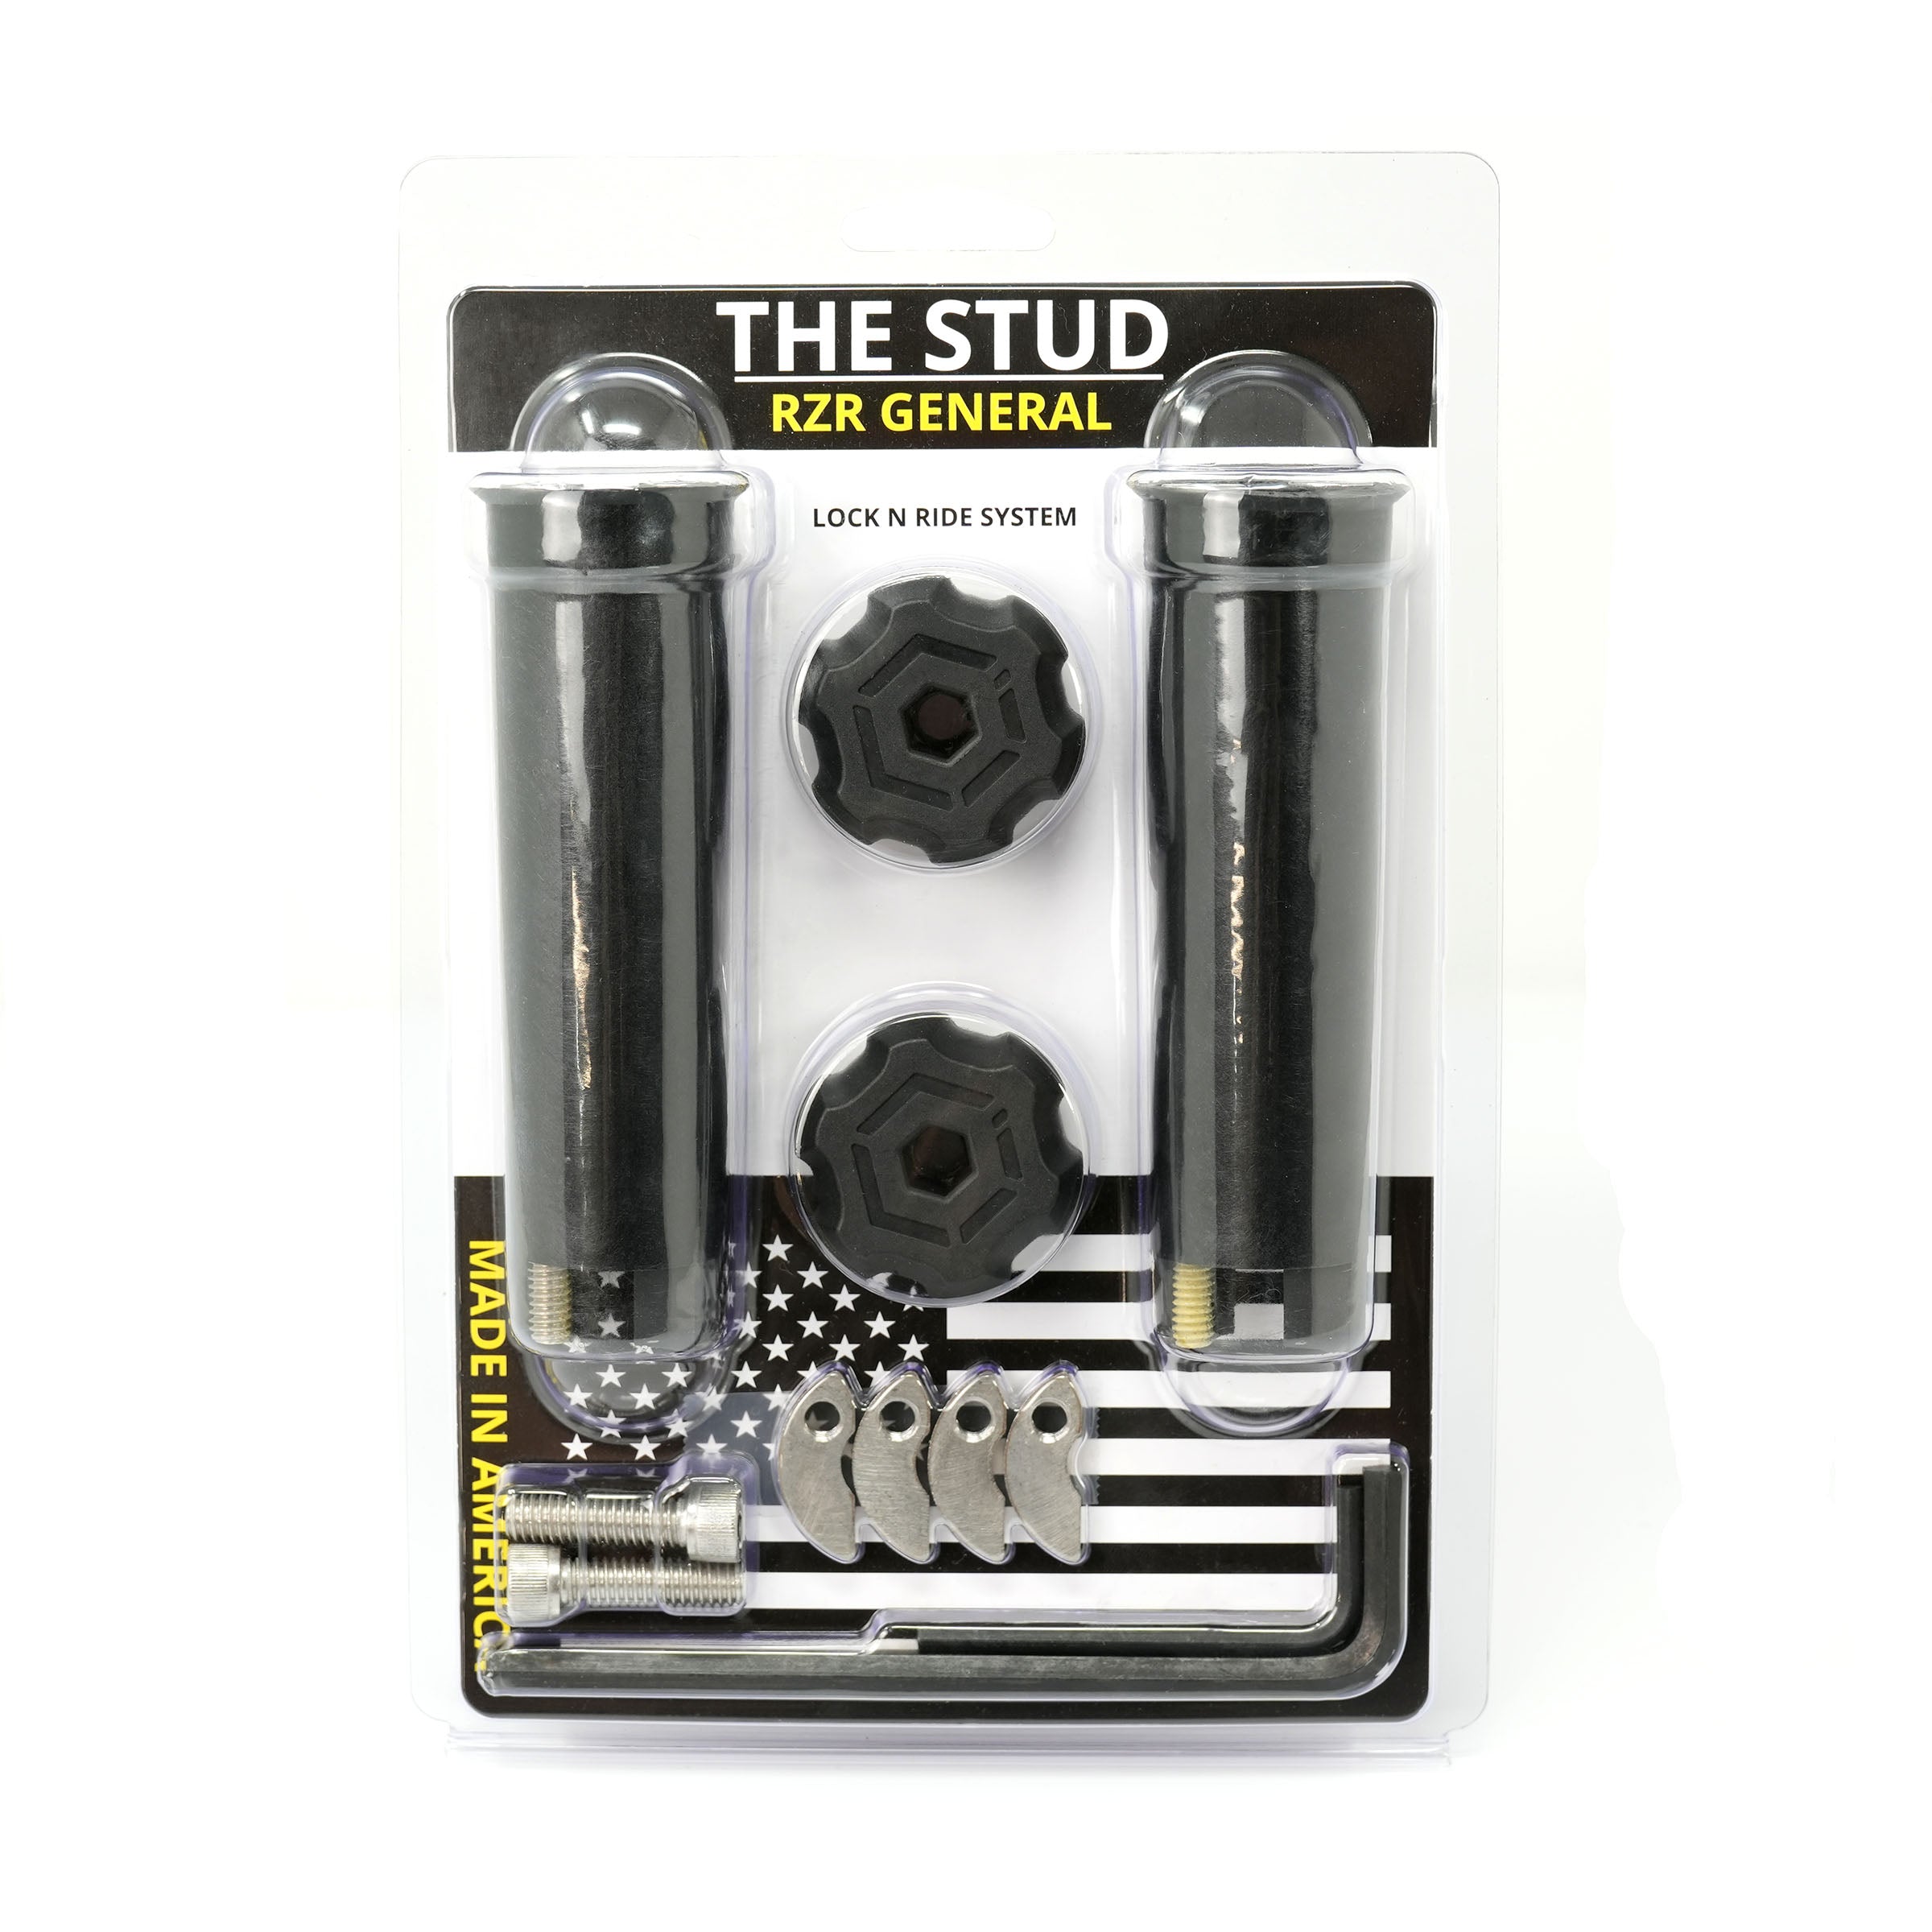 The Stud Anchor System for the RZR General with The Stud Anchor Knob and Tie Down Hook by Litt Industries for the RZR General